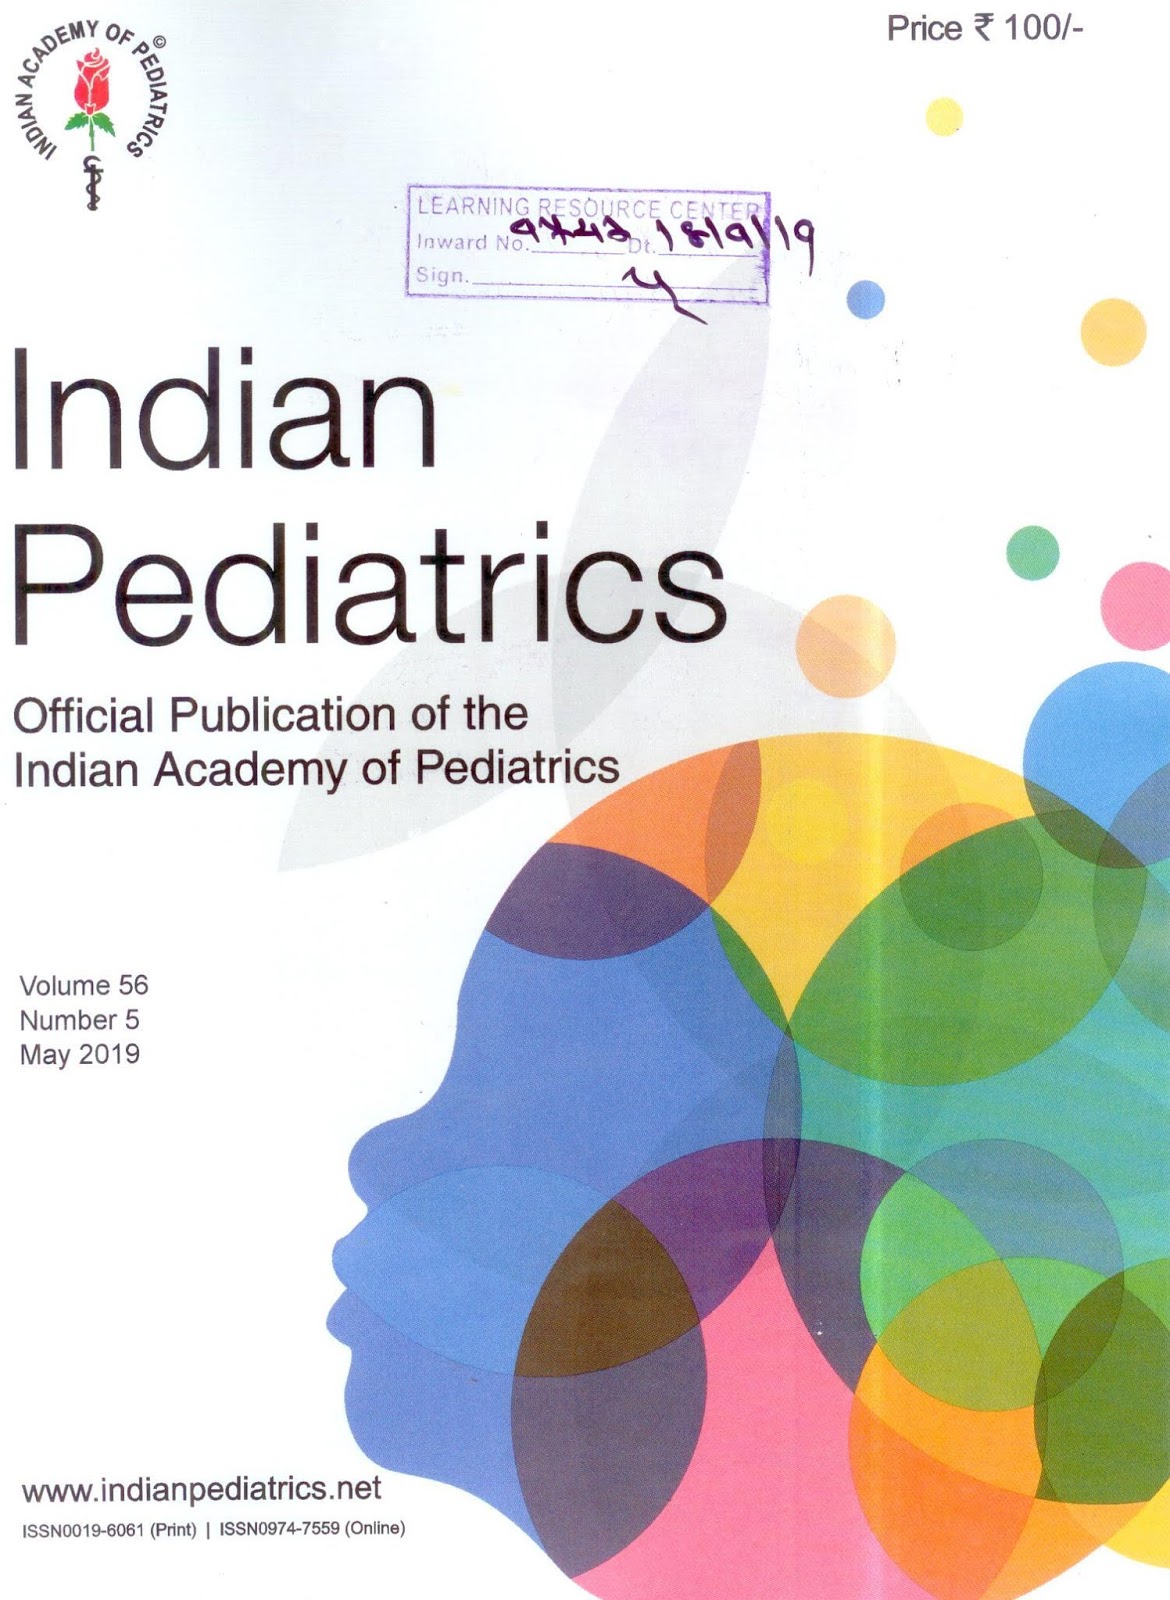 https://www.indianpediatrics.net/may2019/current.htm